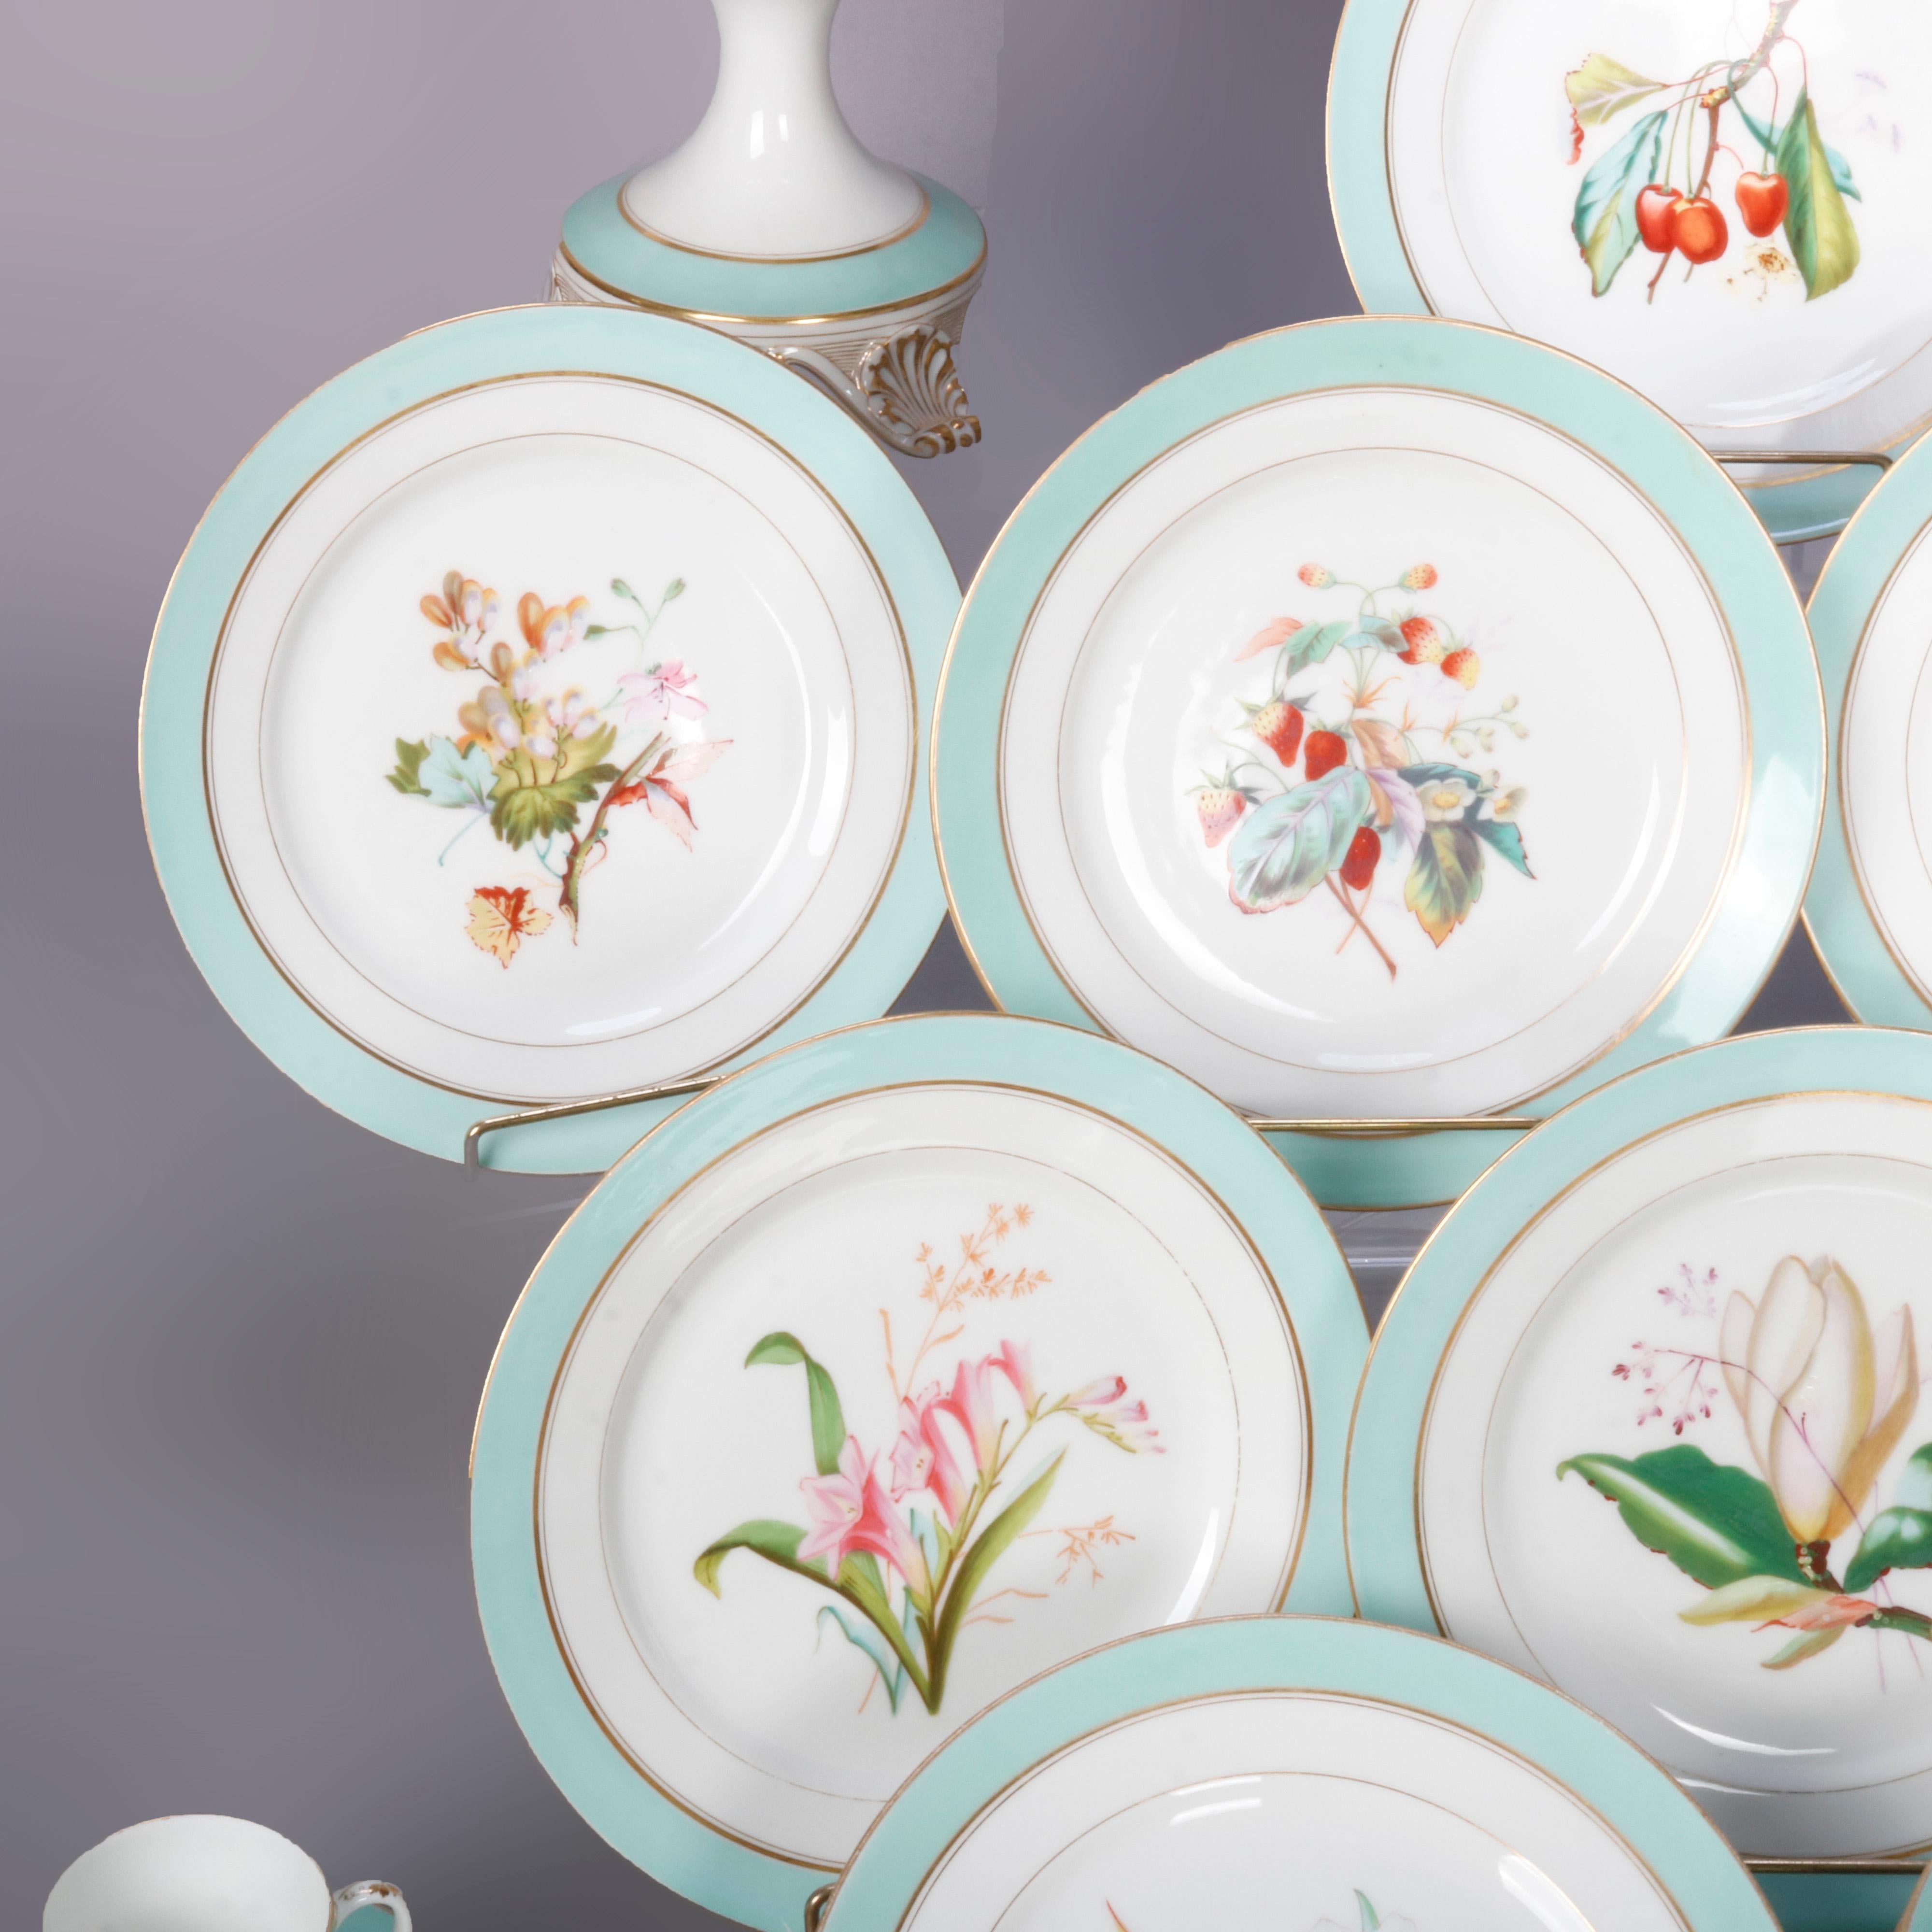 An antique French Old Paris Jacob Petit School Limoges porcelain China dessert set offers hand painted floral plates and compotes with aqua marine blue rims, gilt highlights throughout, set includes 16 plates, 2 compotes and 8 sets with cup and